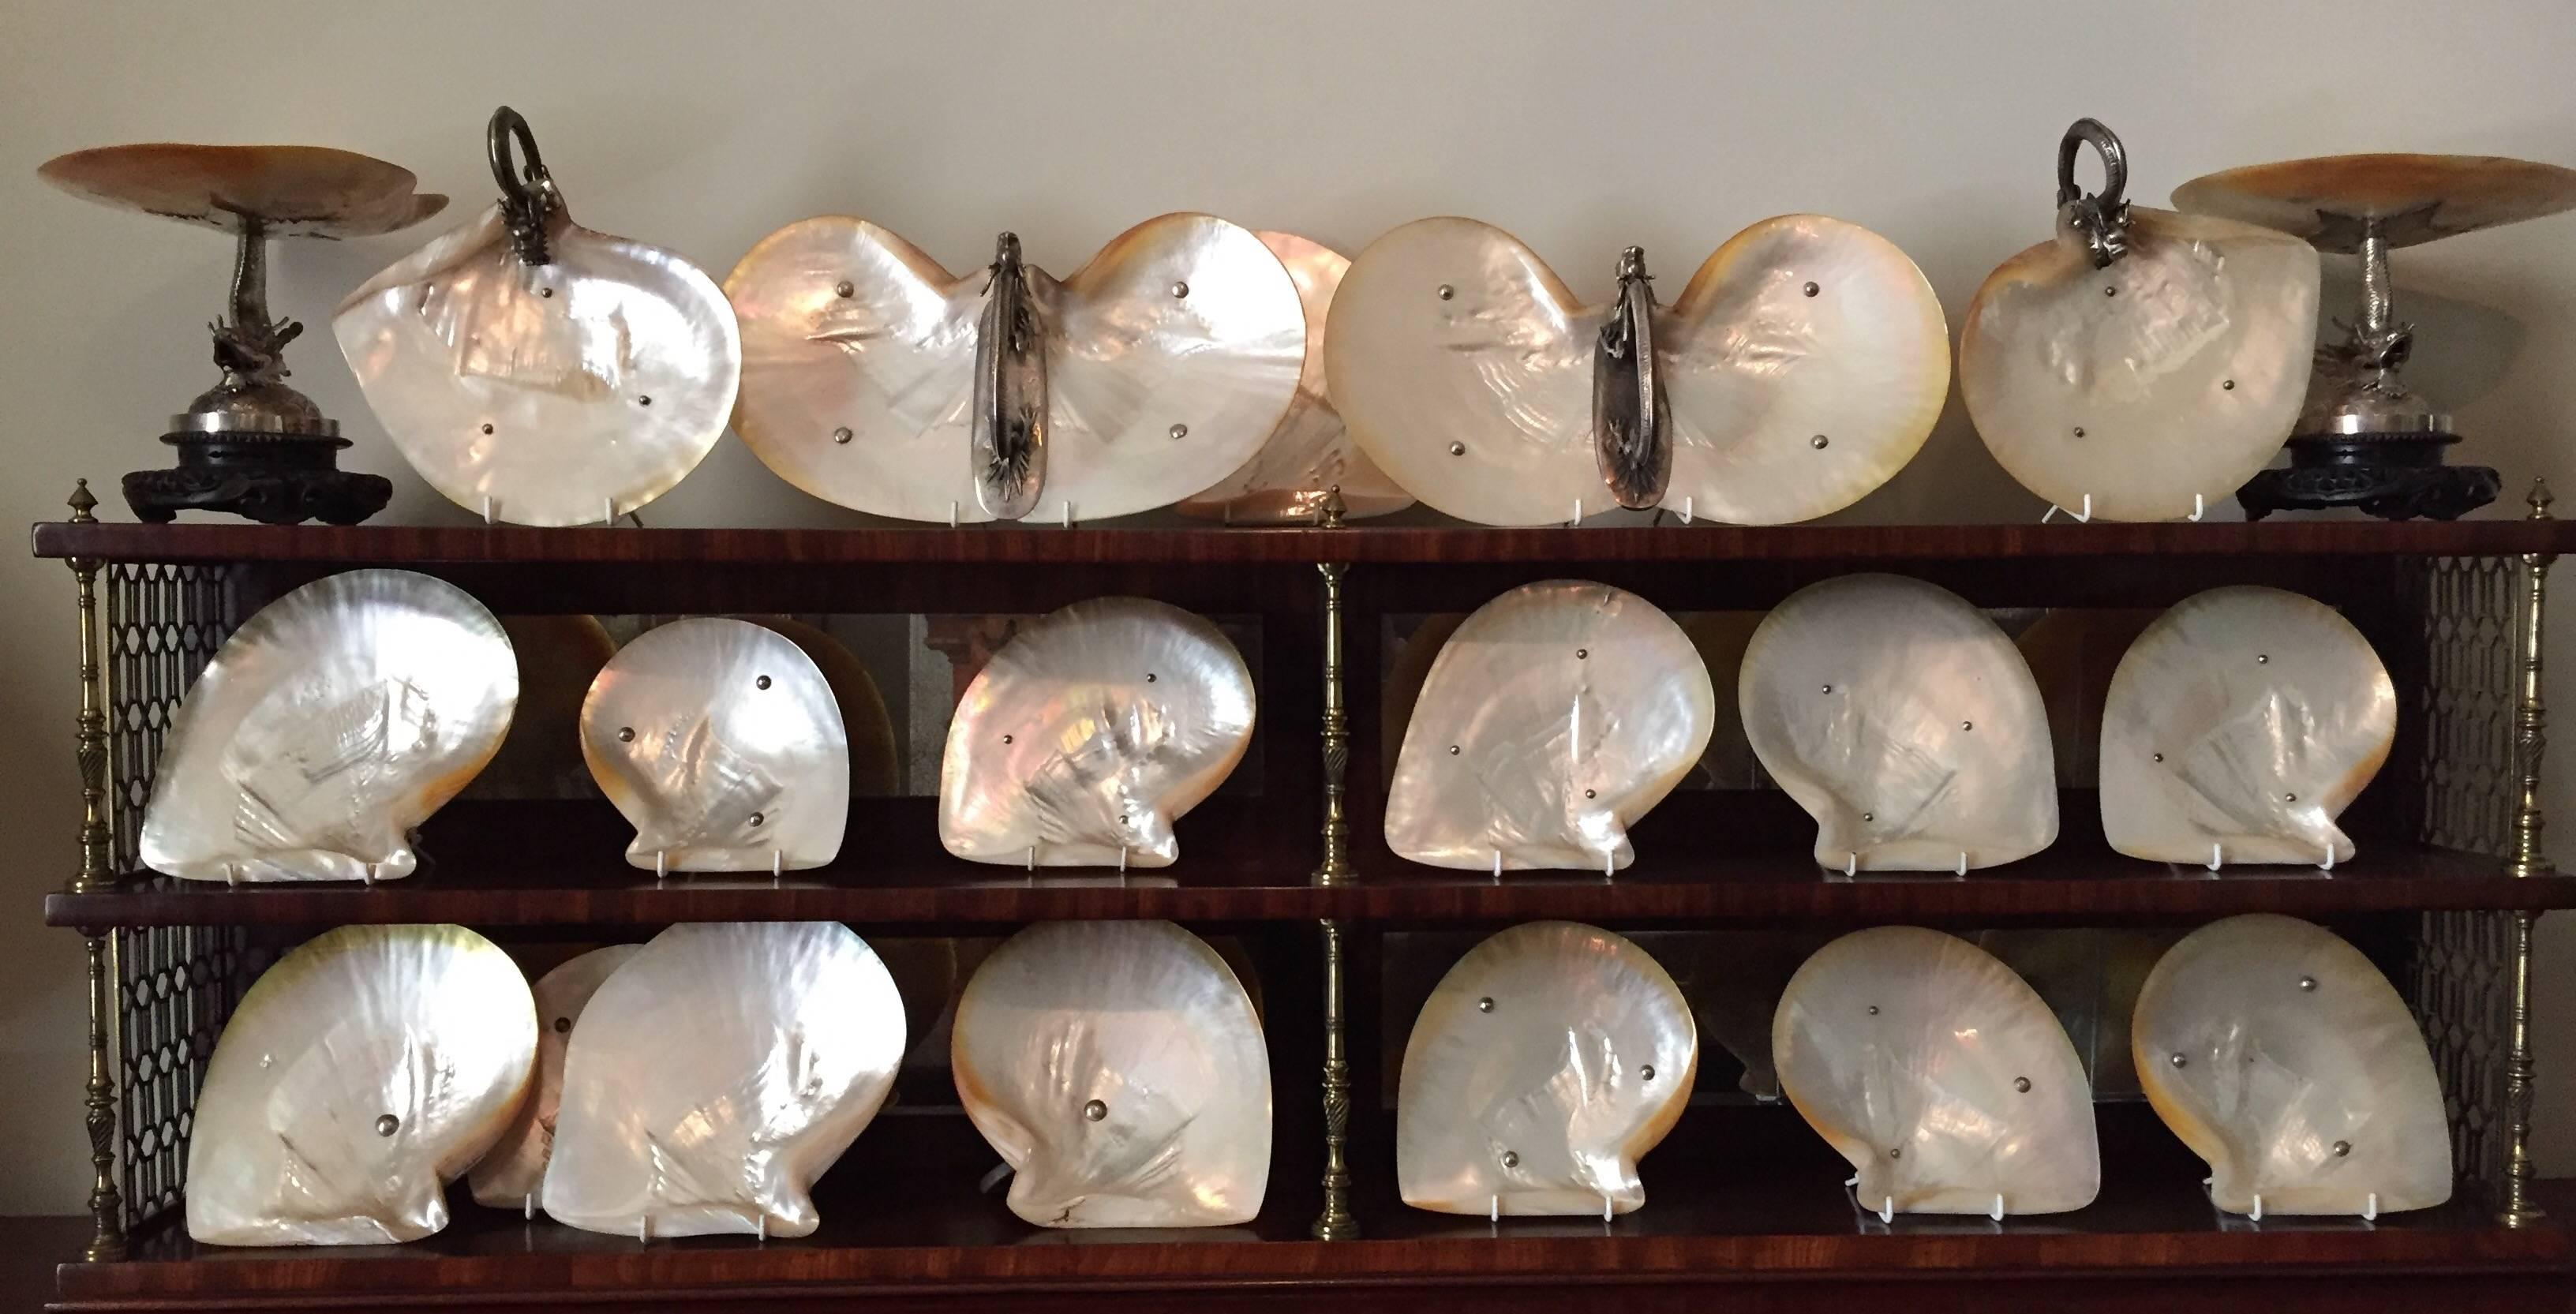 A seemingly unique 18 piece Queensland mother-of-pearl shell dessert service, silver mounted by Wang Hing, Hong Kong, circa 1900 with a dated contemporary correspondence, 6th October 1910 (see attached). 

In the 19th century the Queensland